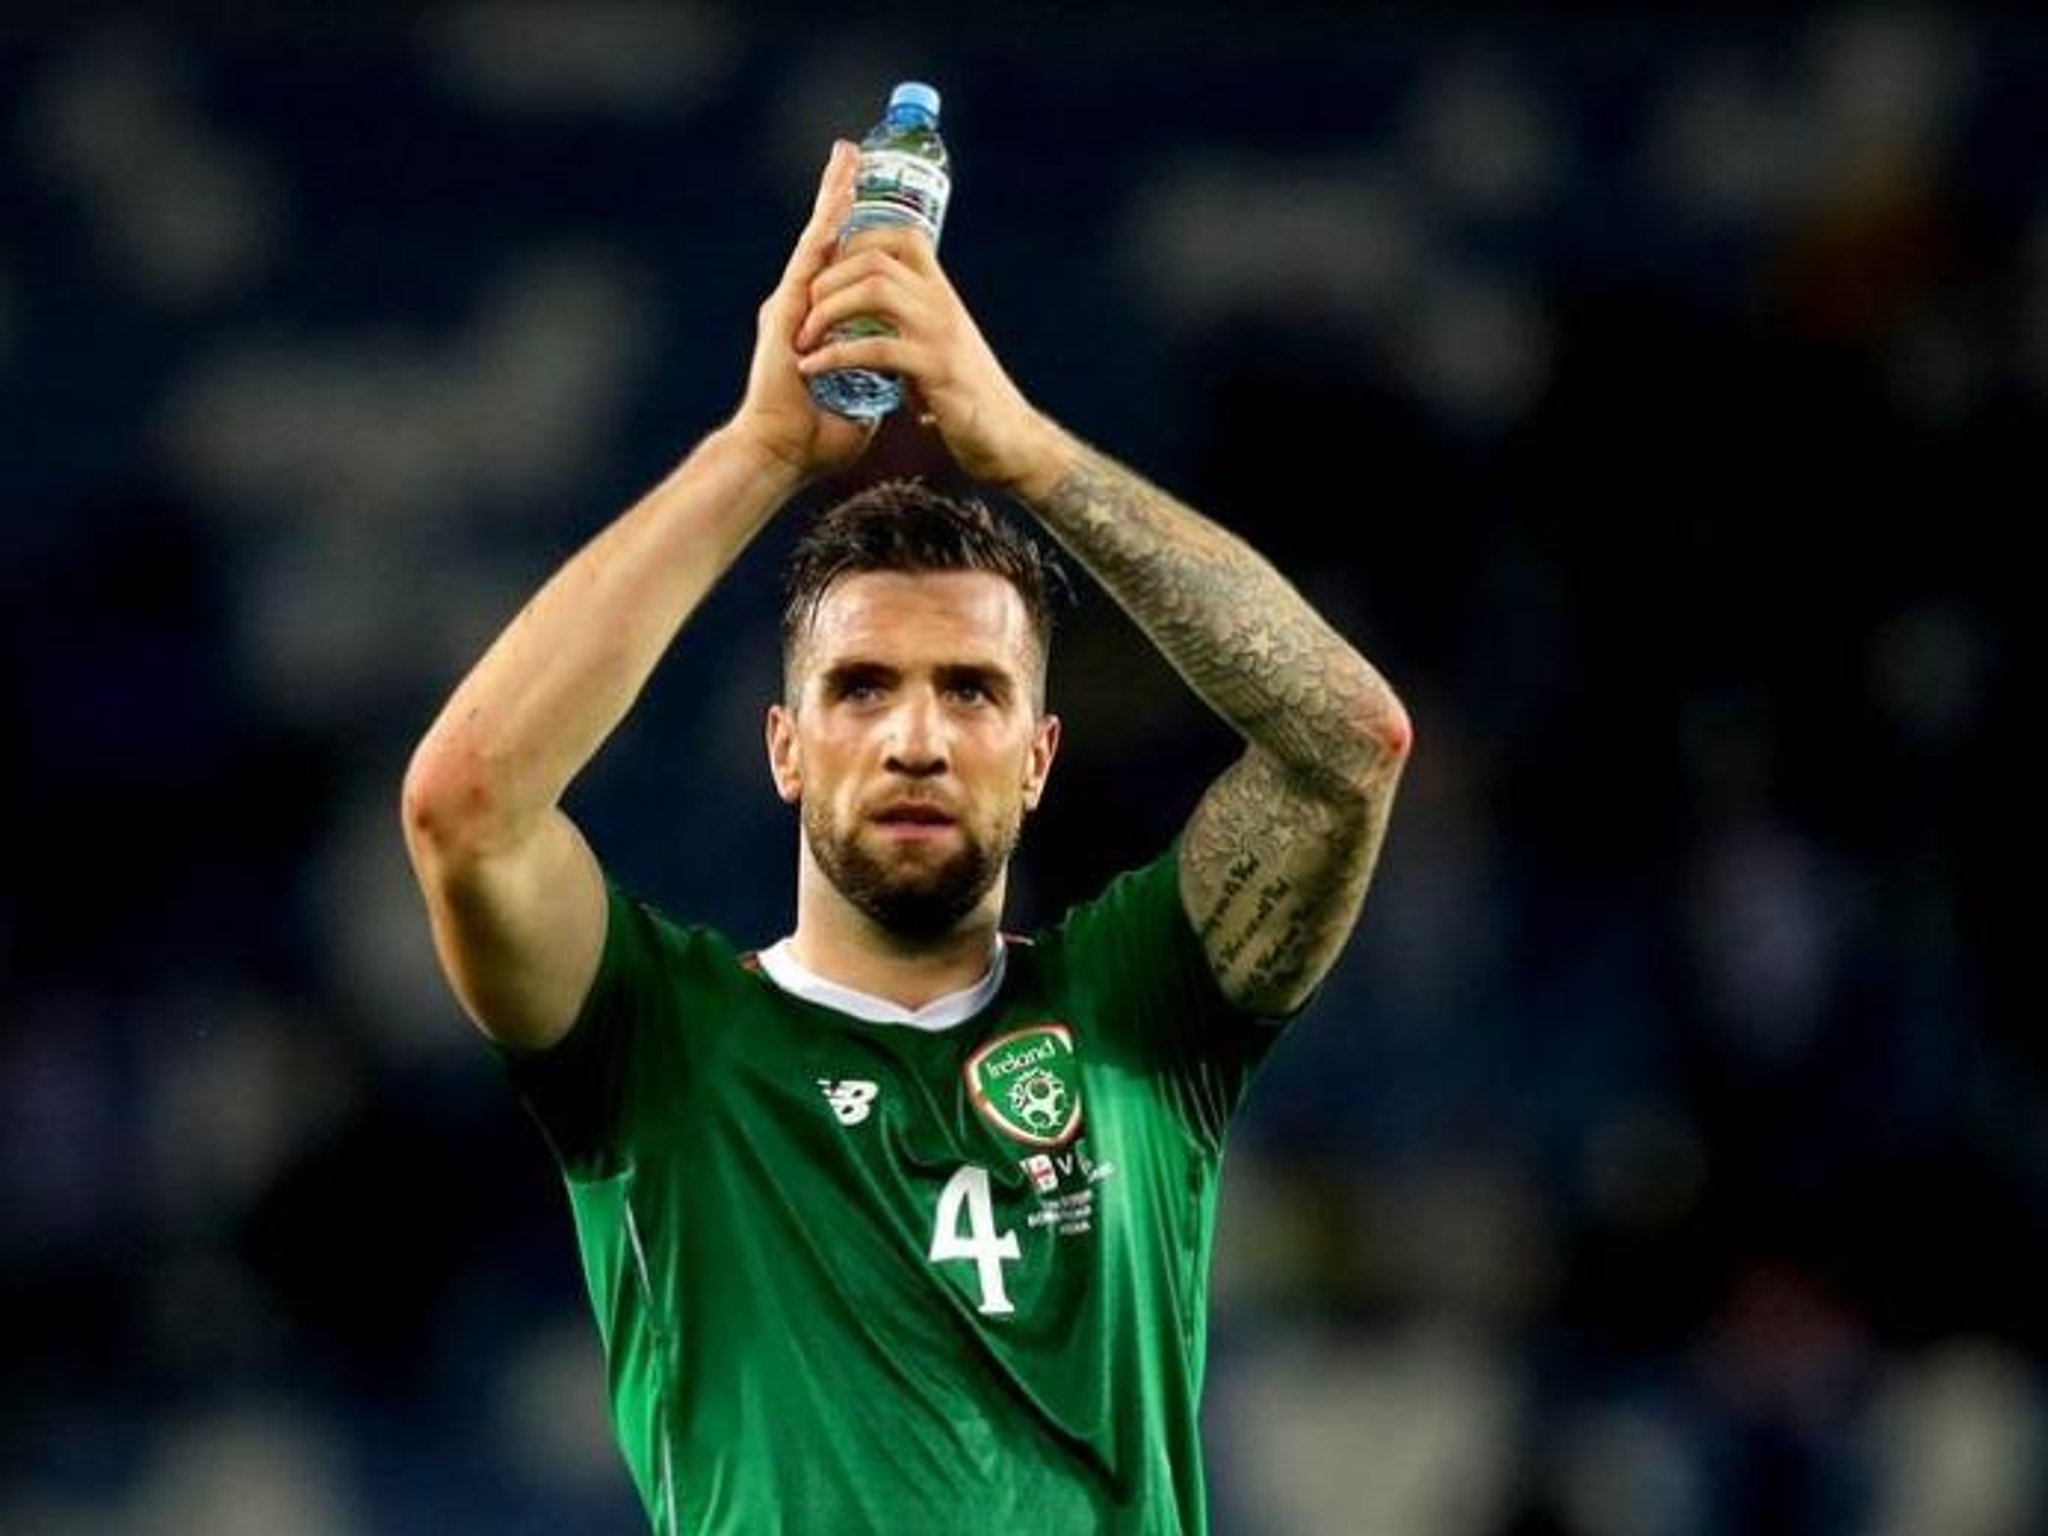 Shane Duffy McCourt played a part on his dream move to Celtic Journal